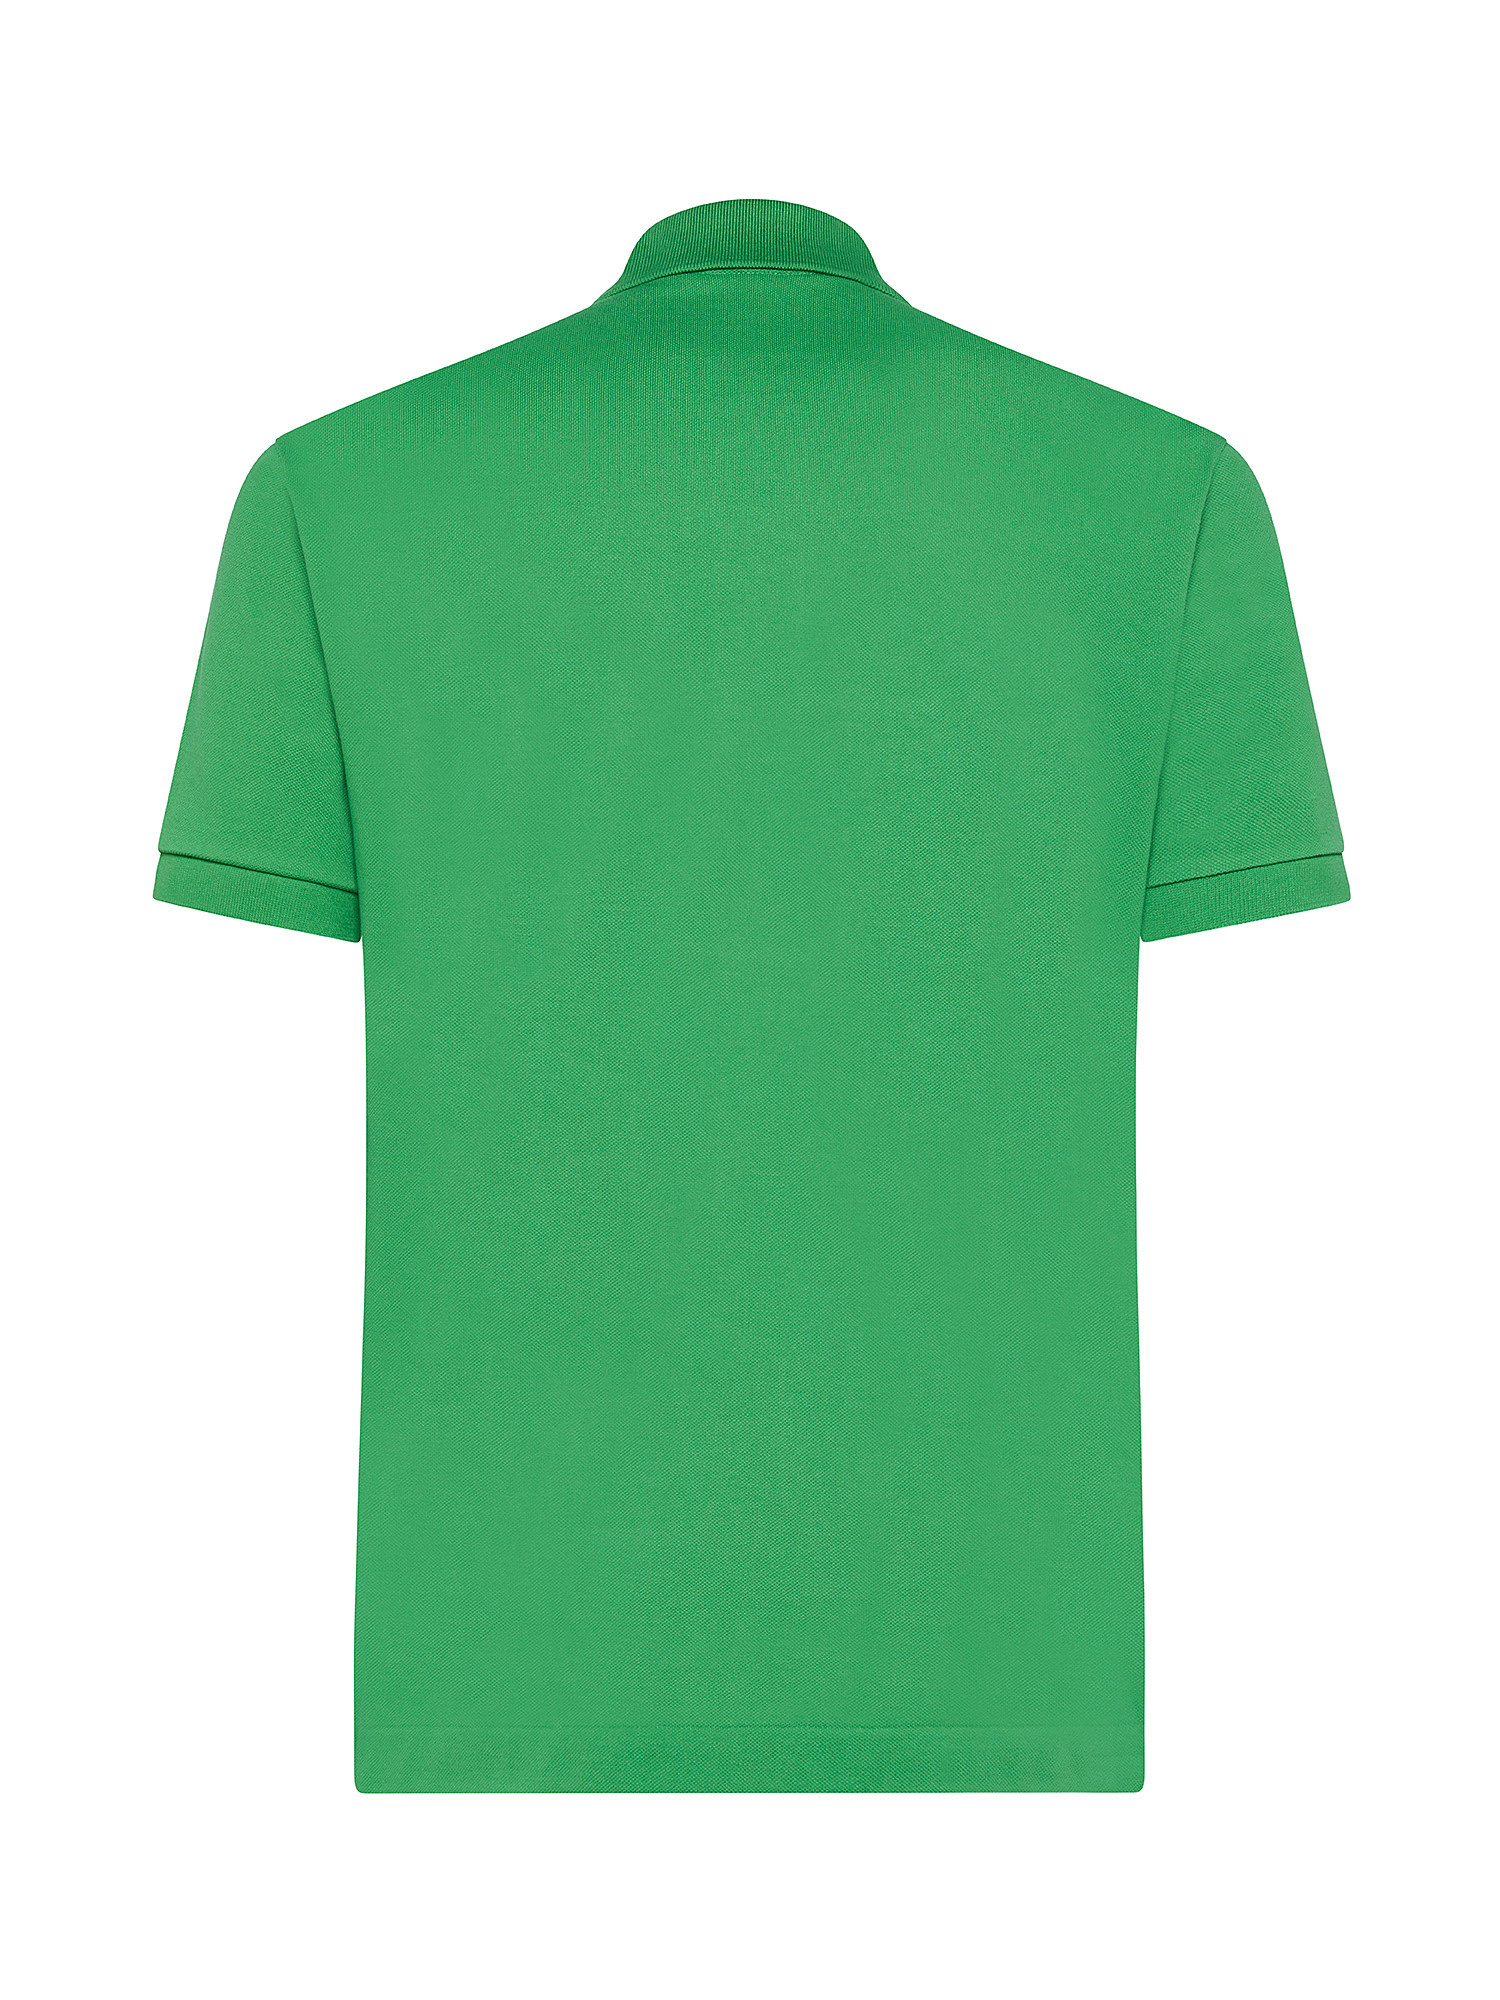 Lacoste - Classic cut polo shirt in petit piquè cotton, Green, large image number 1